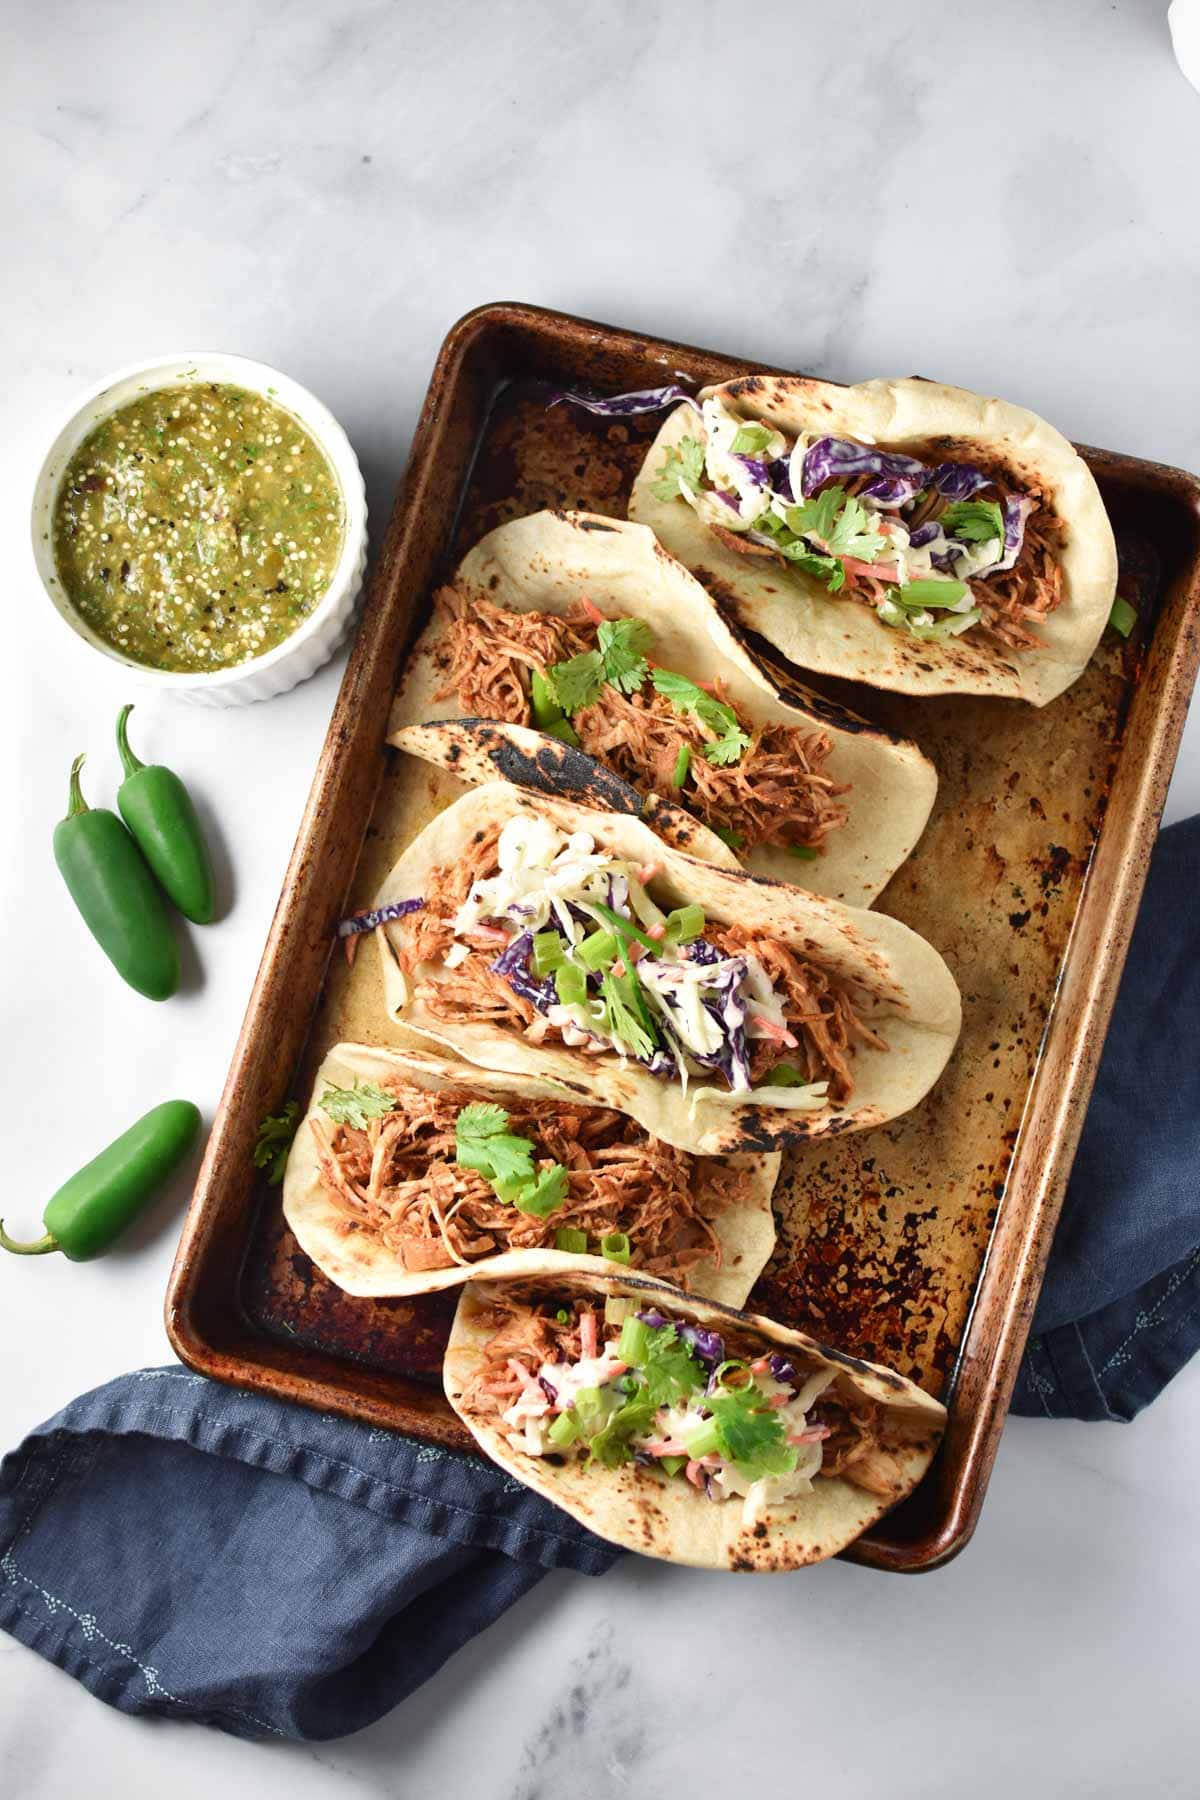 Shredded chicken tinga tacos next to jalapeno peppers